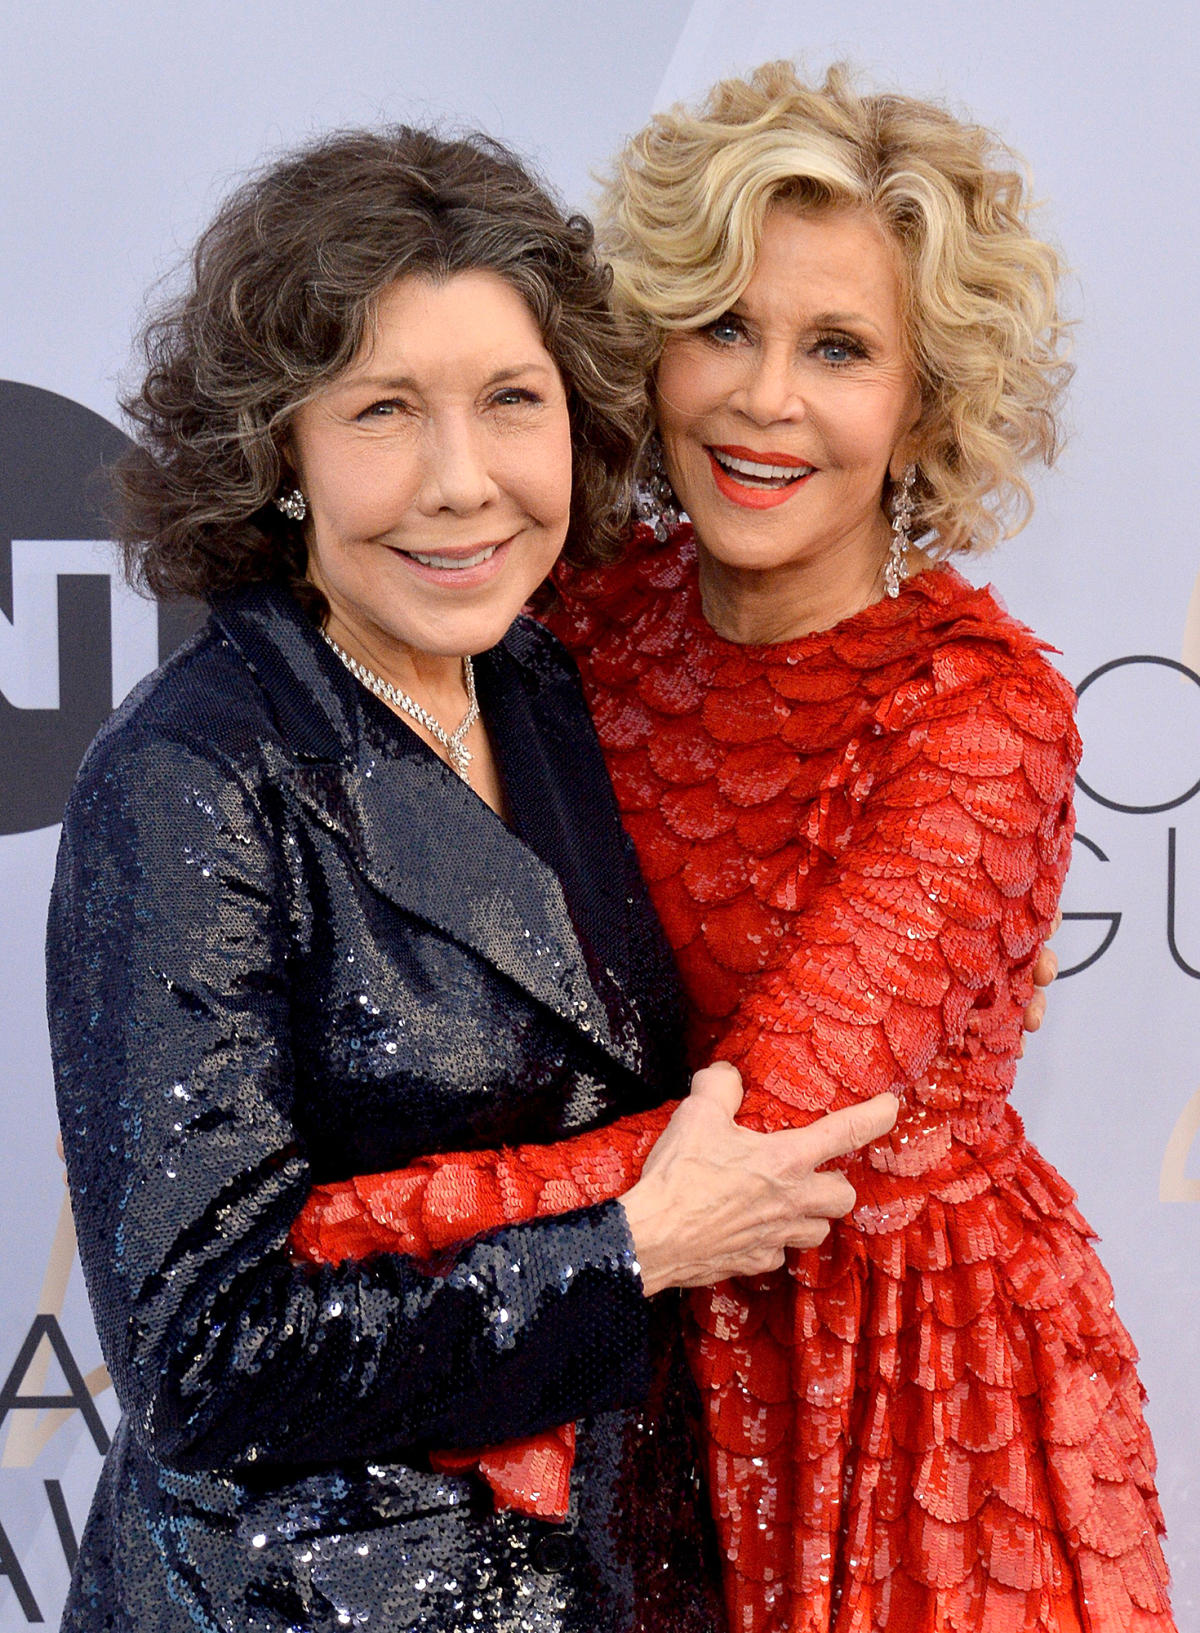 Everything Jane Fonda and Lily Tomlin Have Said About Their Friendship